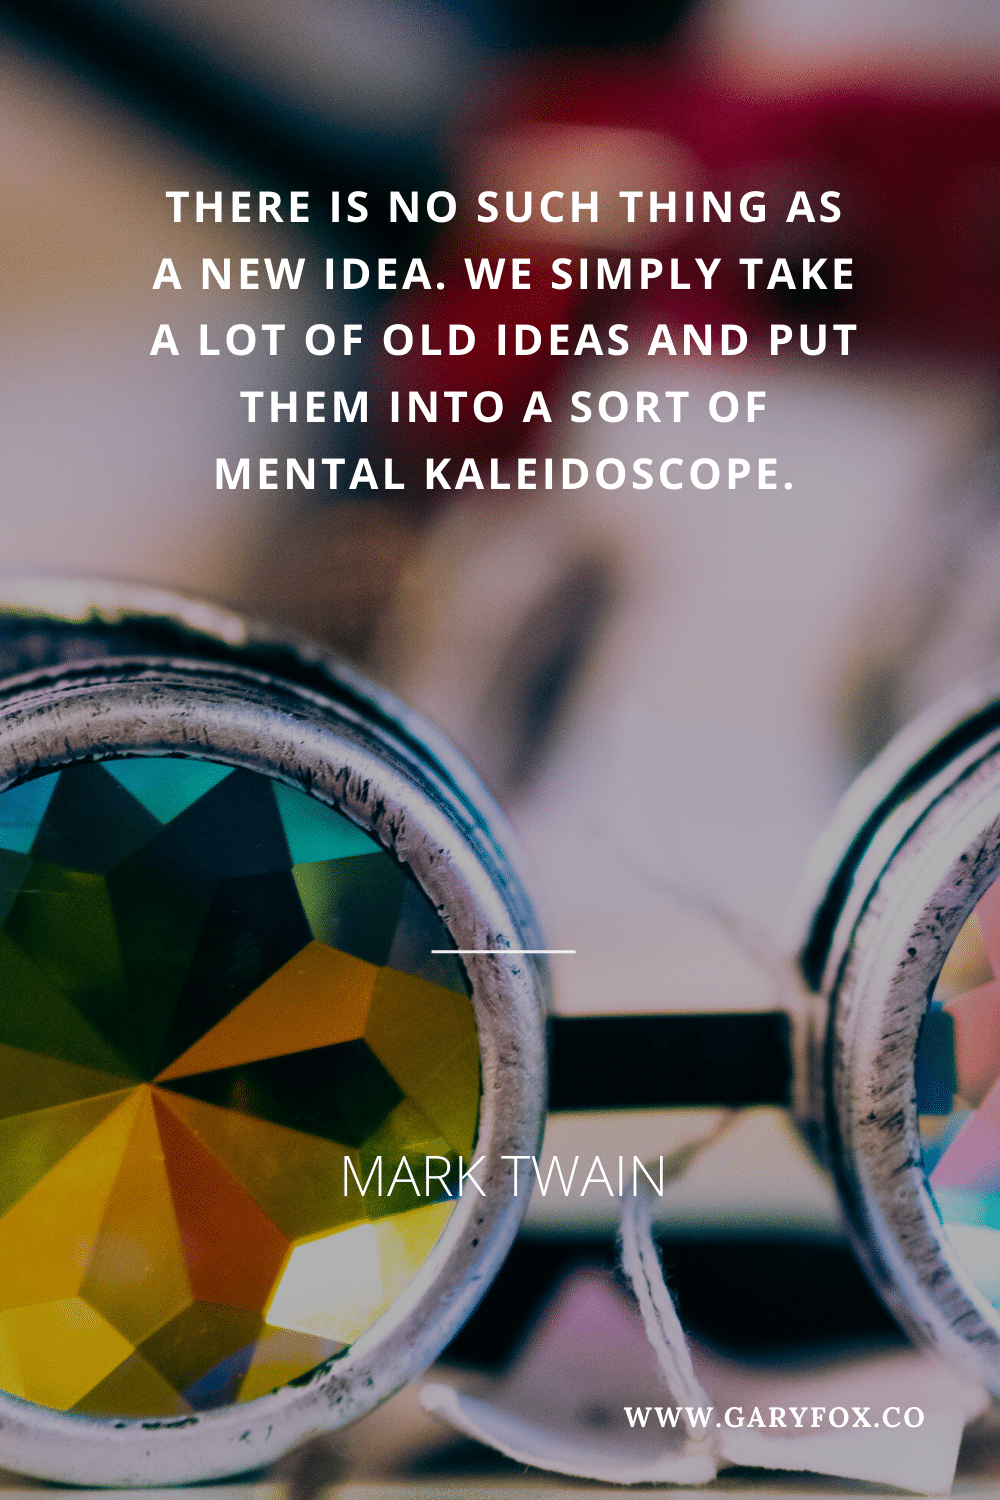 There Is No Such Thing As A New Idea. We Simply Take A Lot Of Old Ideas And Put Them Into A Sort Of Mental Kaleidoscope. - Mark Twain